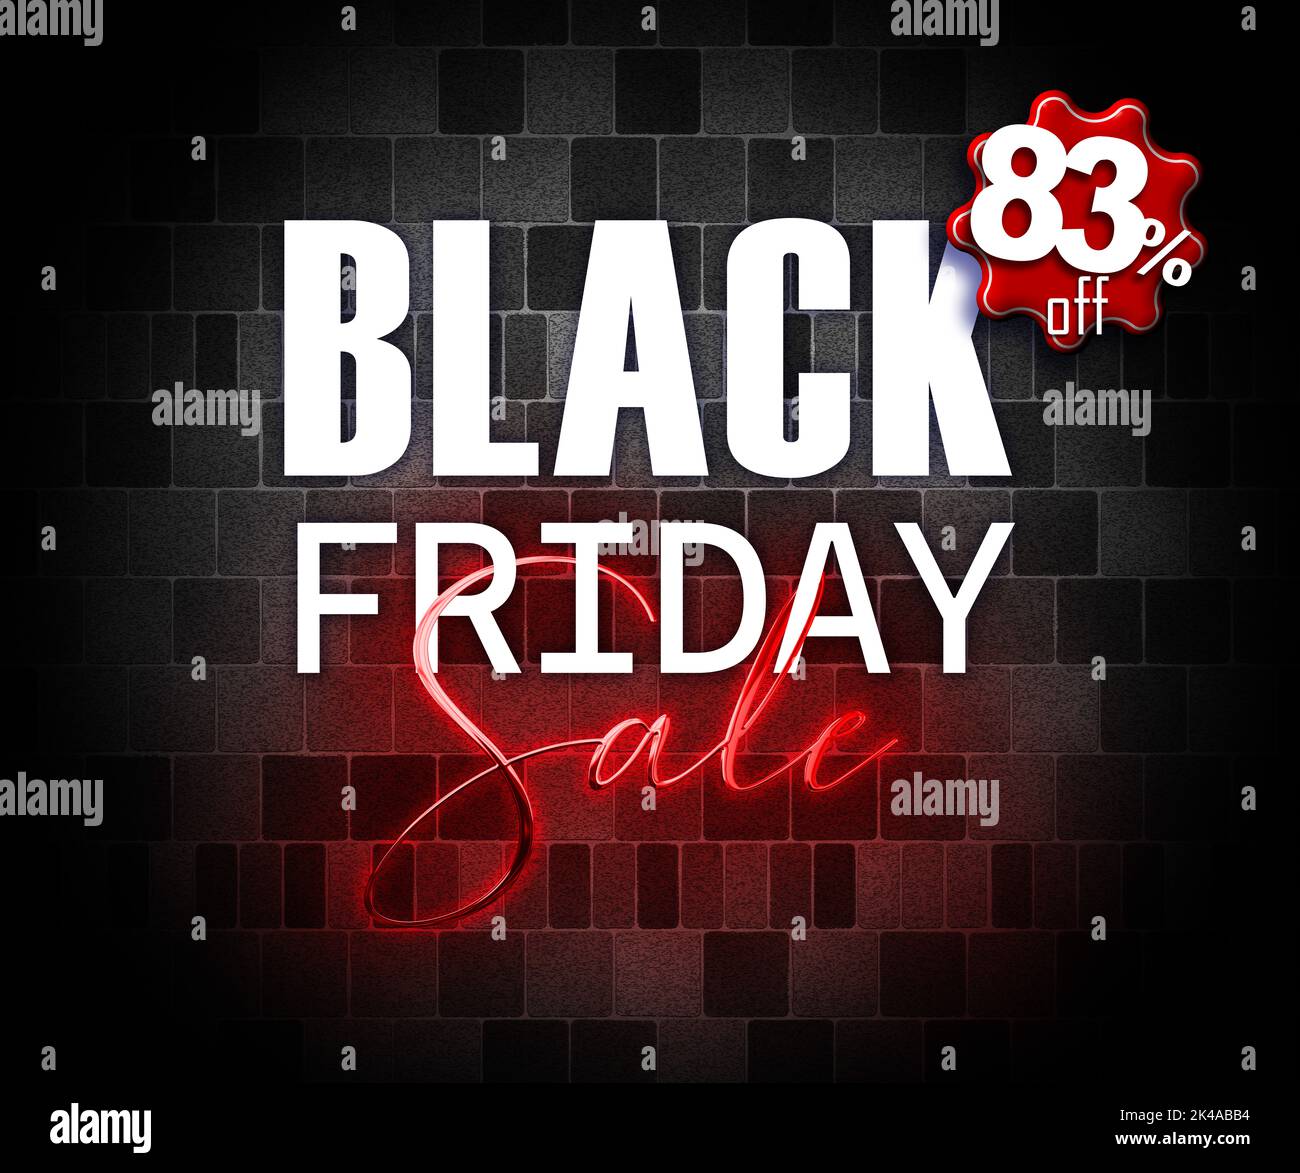 illustration with 3d elements black friday promotion banner 83 percent off sales increase Stock Photo